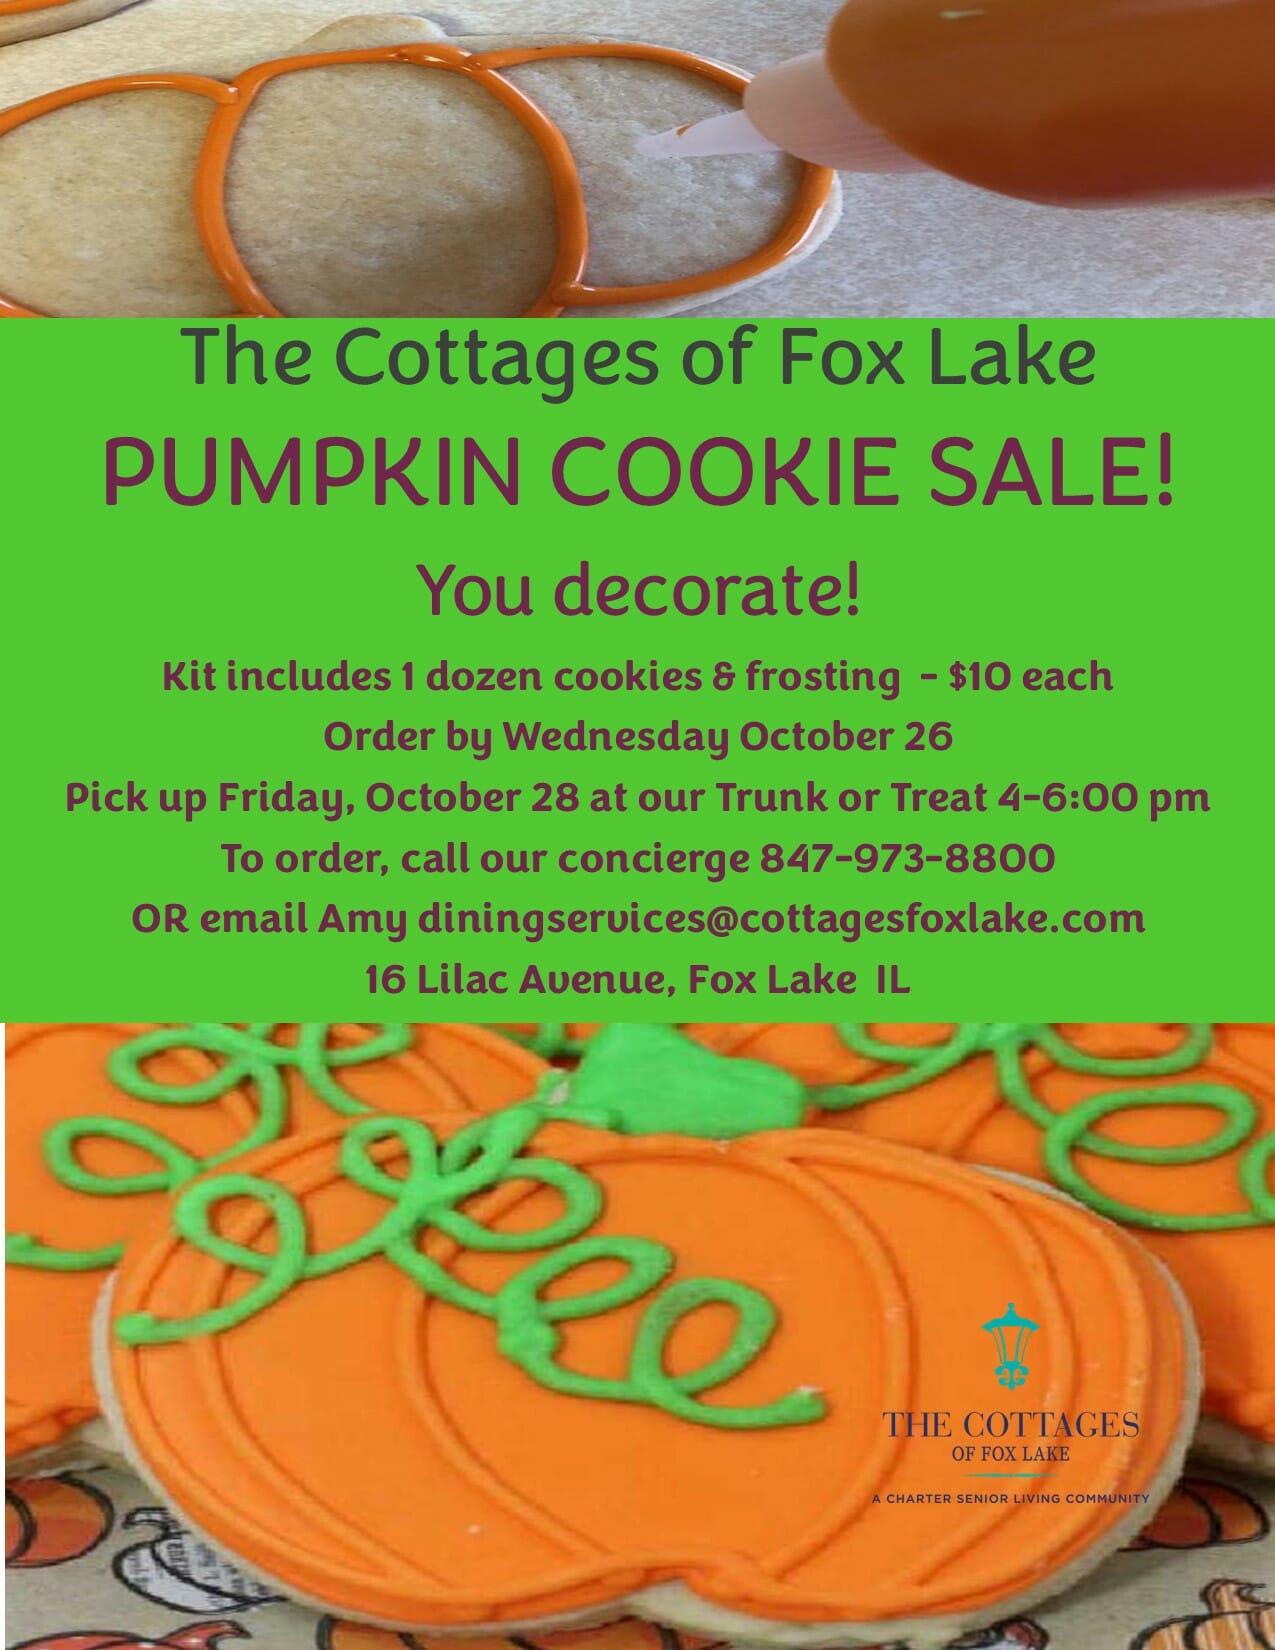 Cottages of Fox Lake - Assisted Living and Memory Care - Pumpkin Cookie Sale